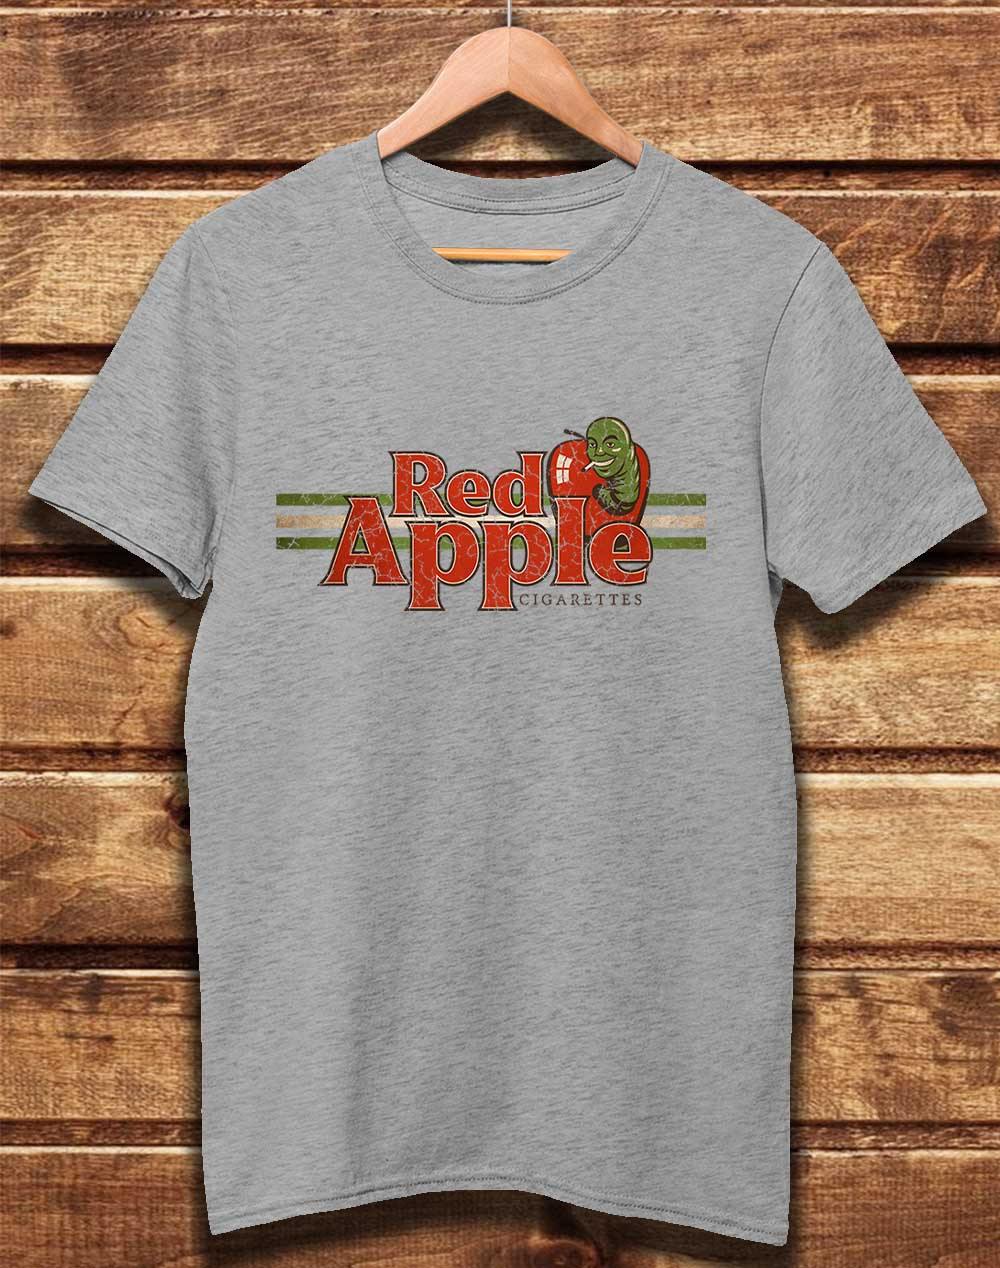 DELUXE Red Apple Cigarettes Organic Cotton T-Shirt XS / Melange Grey  - Off World Tees